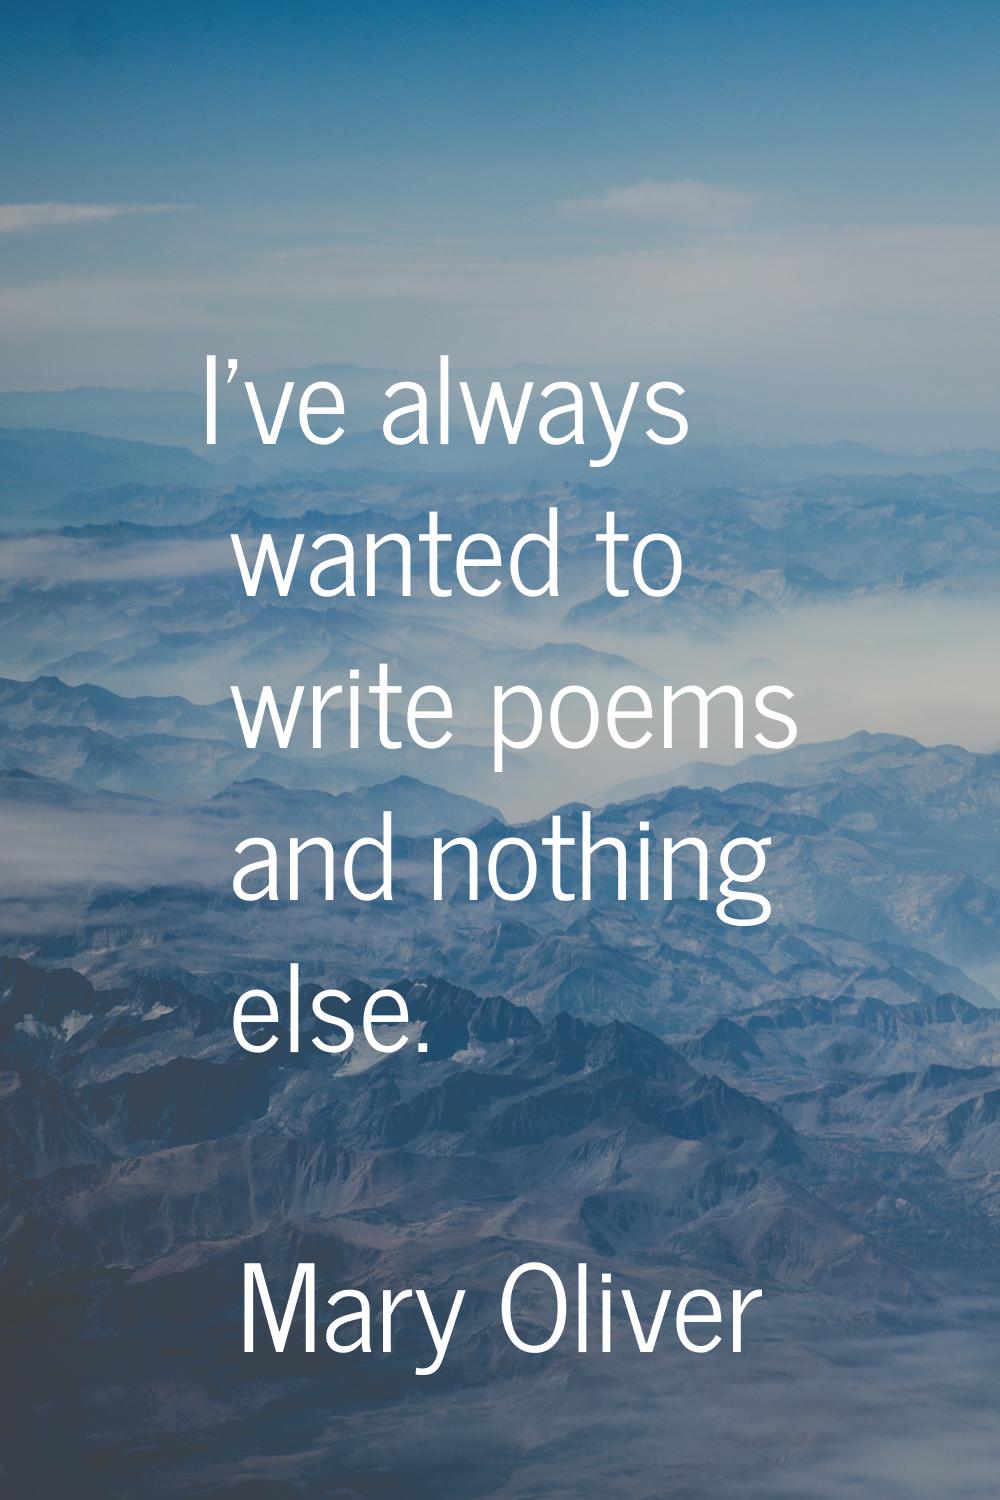 I've always wanted to write poems and nothing else.